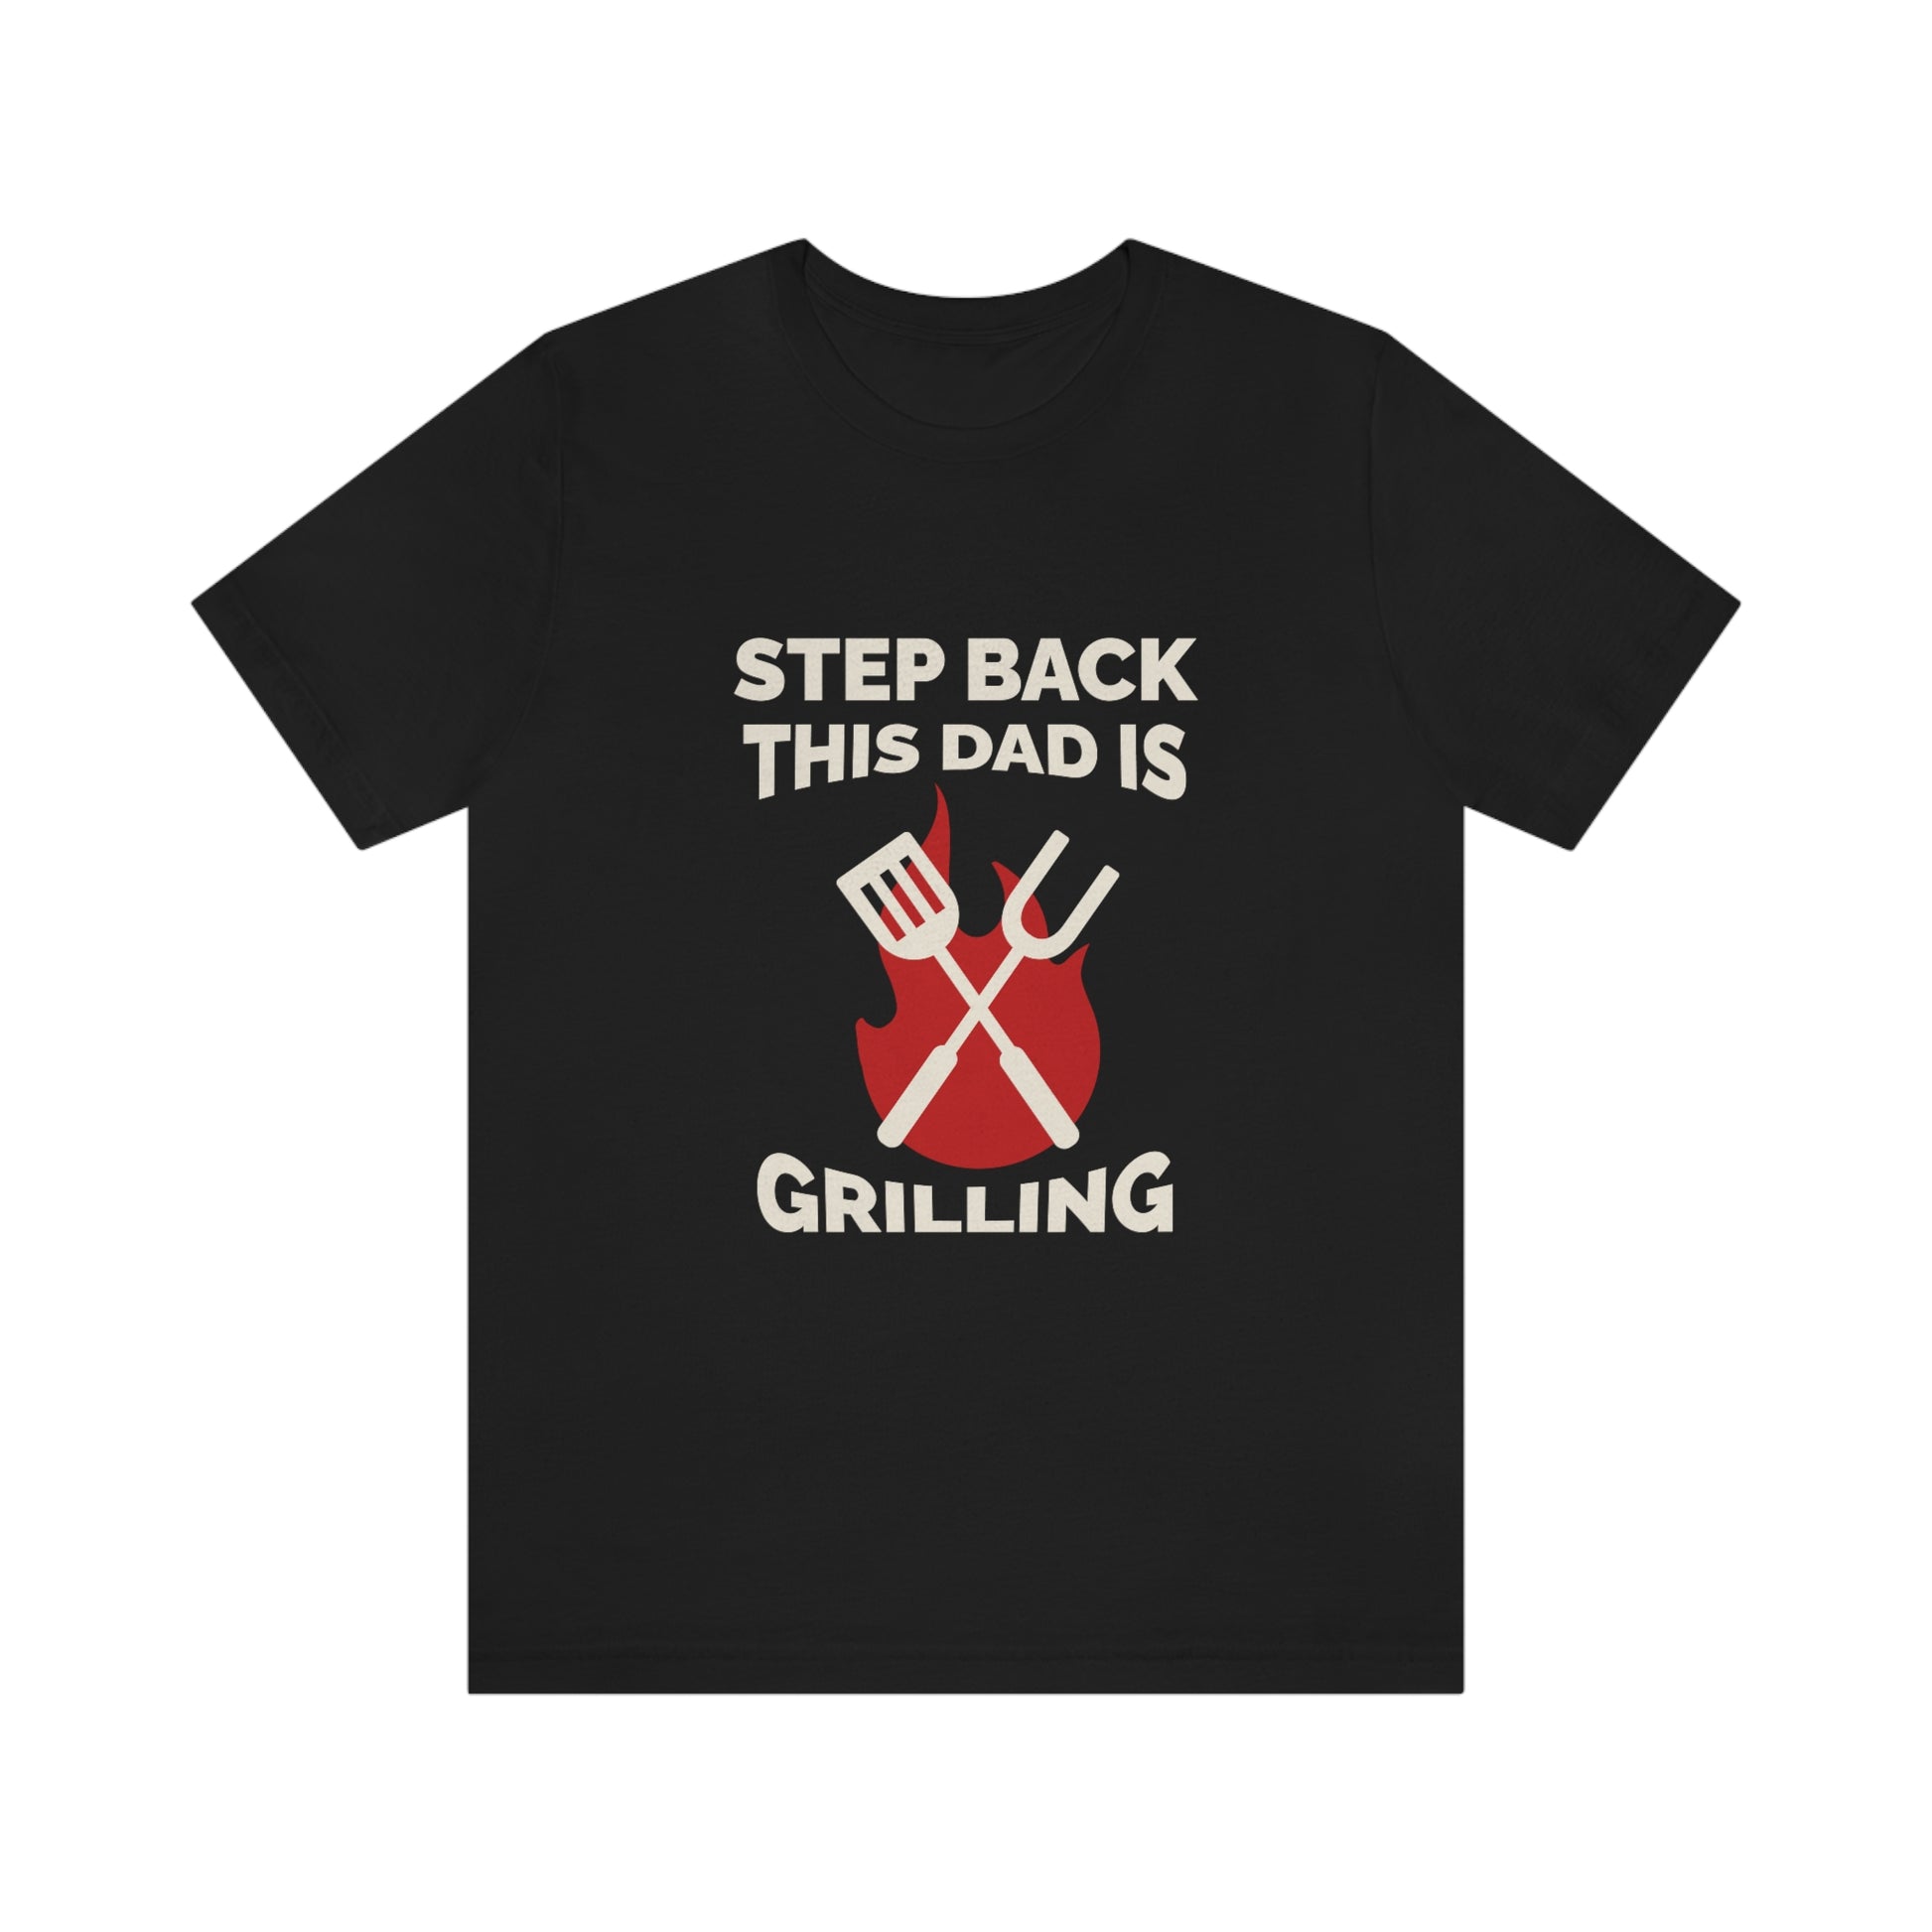 Step back, this dad is grilling - Funny Unisex Short Sleeve Tee - CrazyTomTShirts